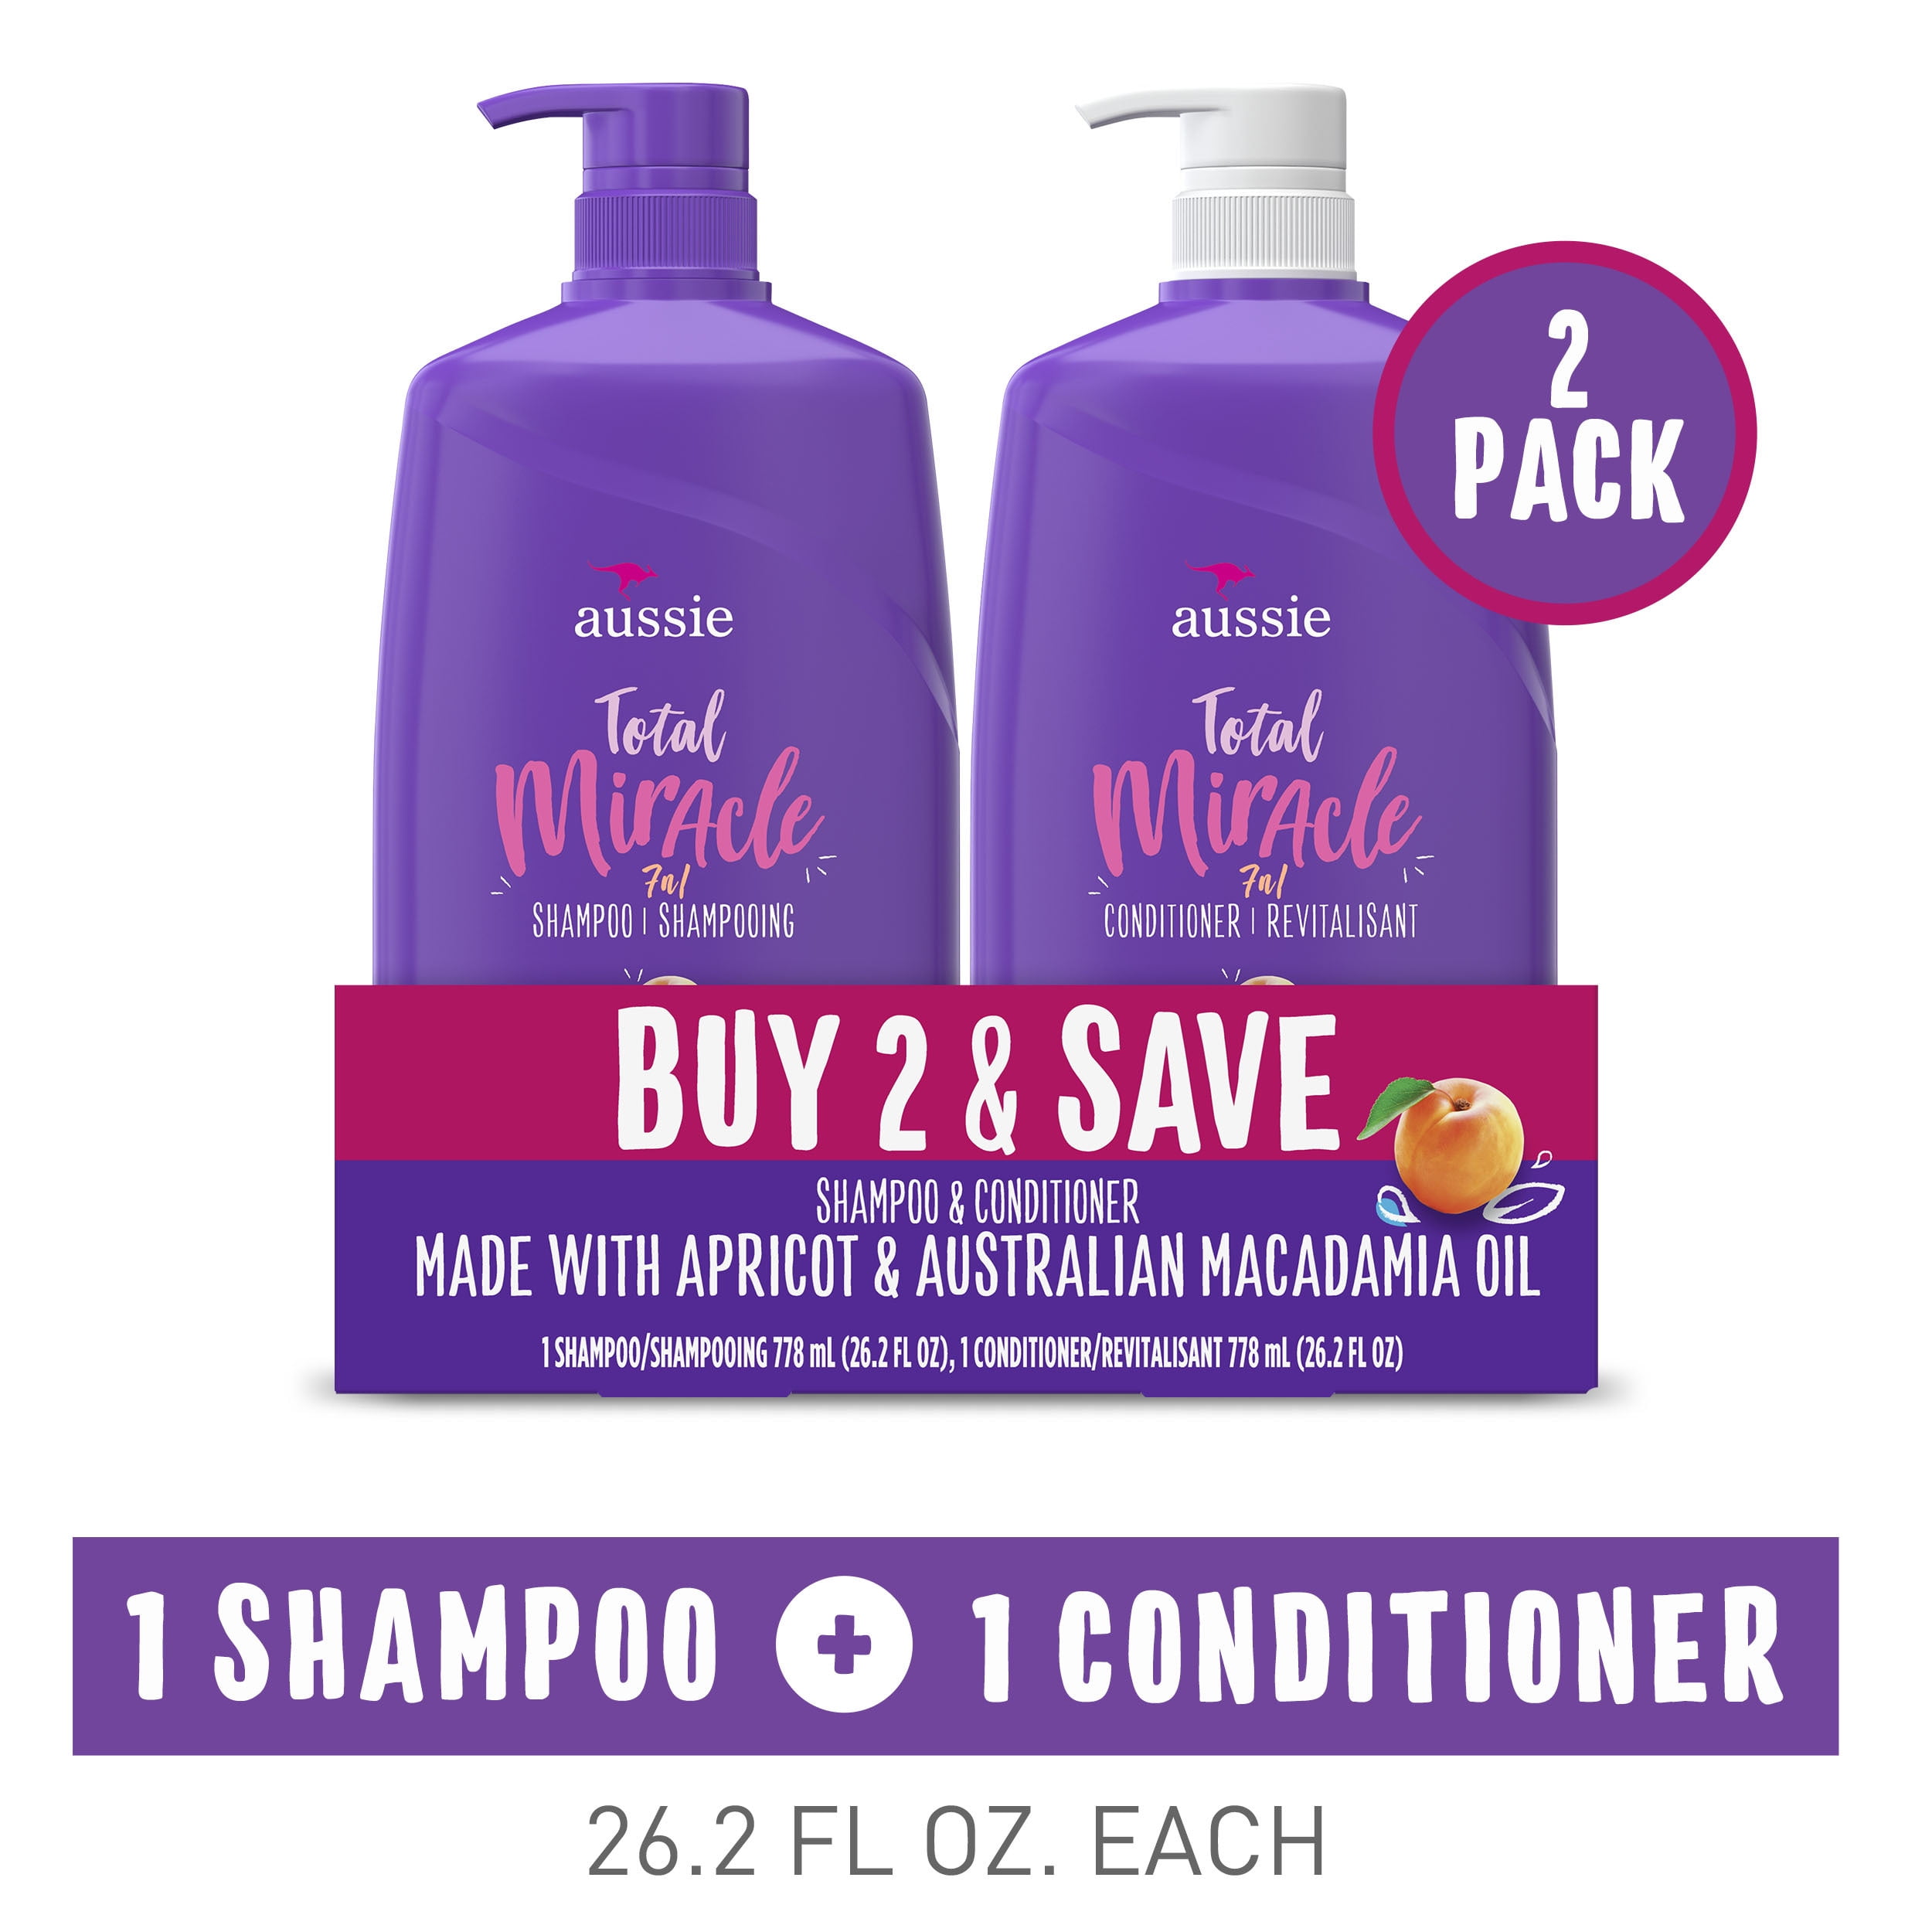 Aussie Total with Apricot & Macadamia Oil, Paraben Free Shampoo and Conditioner Twin Pack - Walmart.com